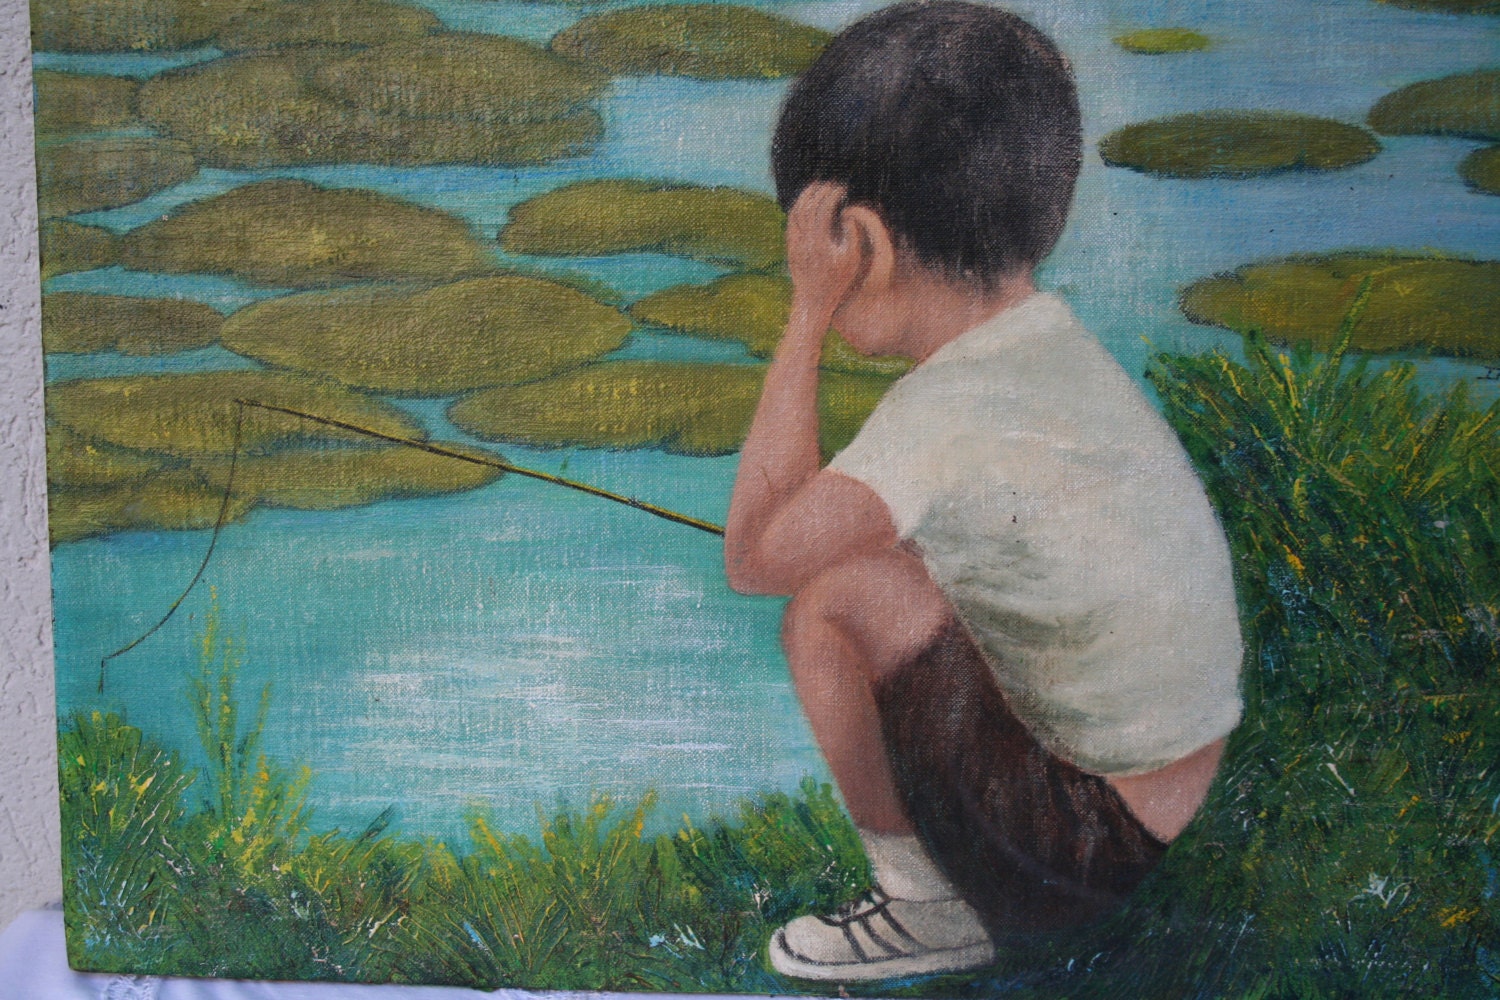 Painting of Little Boy Fishing Vintage Signed Dixie Graves Titled craig  Pond Water Lilies Acrylics on Thin Painters Canvas Board Wall Art 